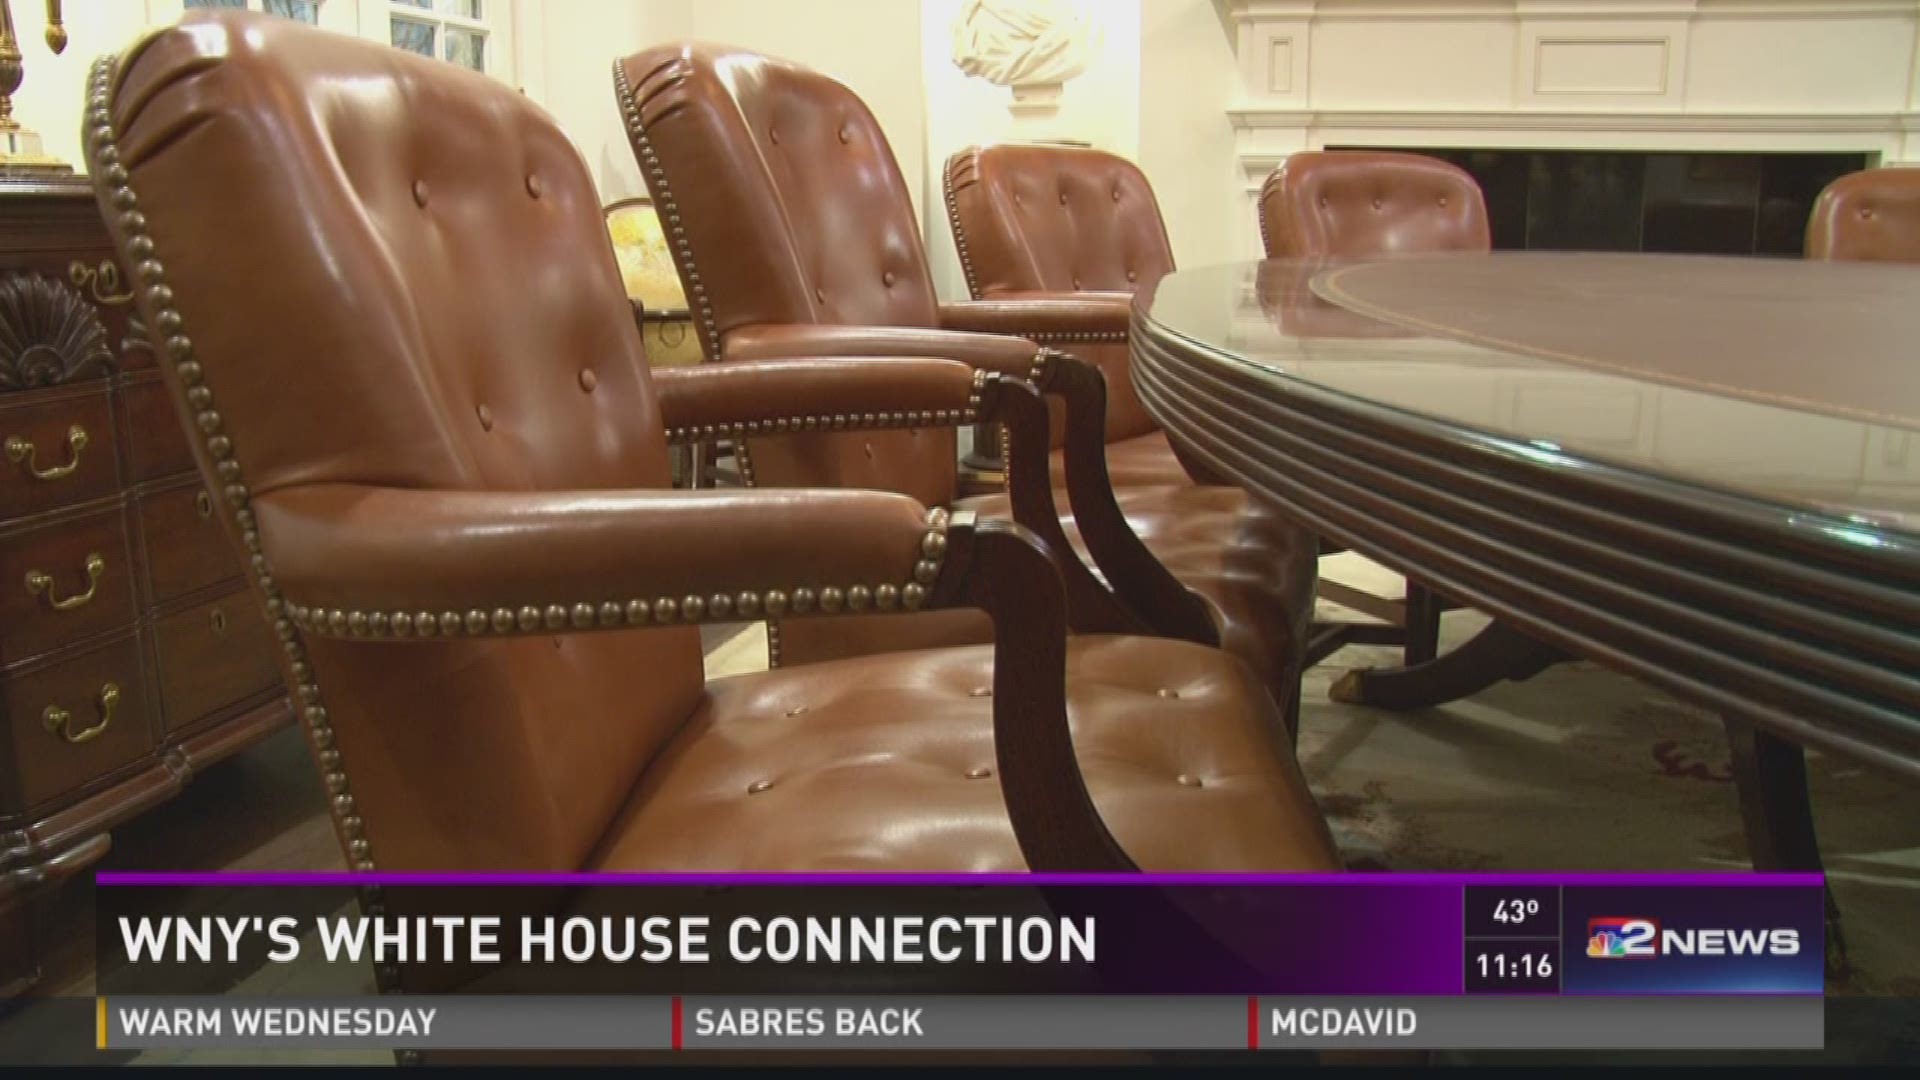 WNY'S WHITE HOUSE CONNECTION